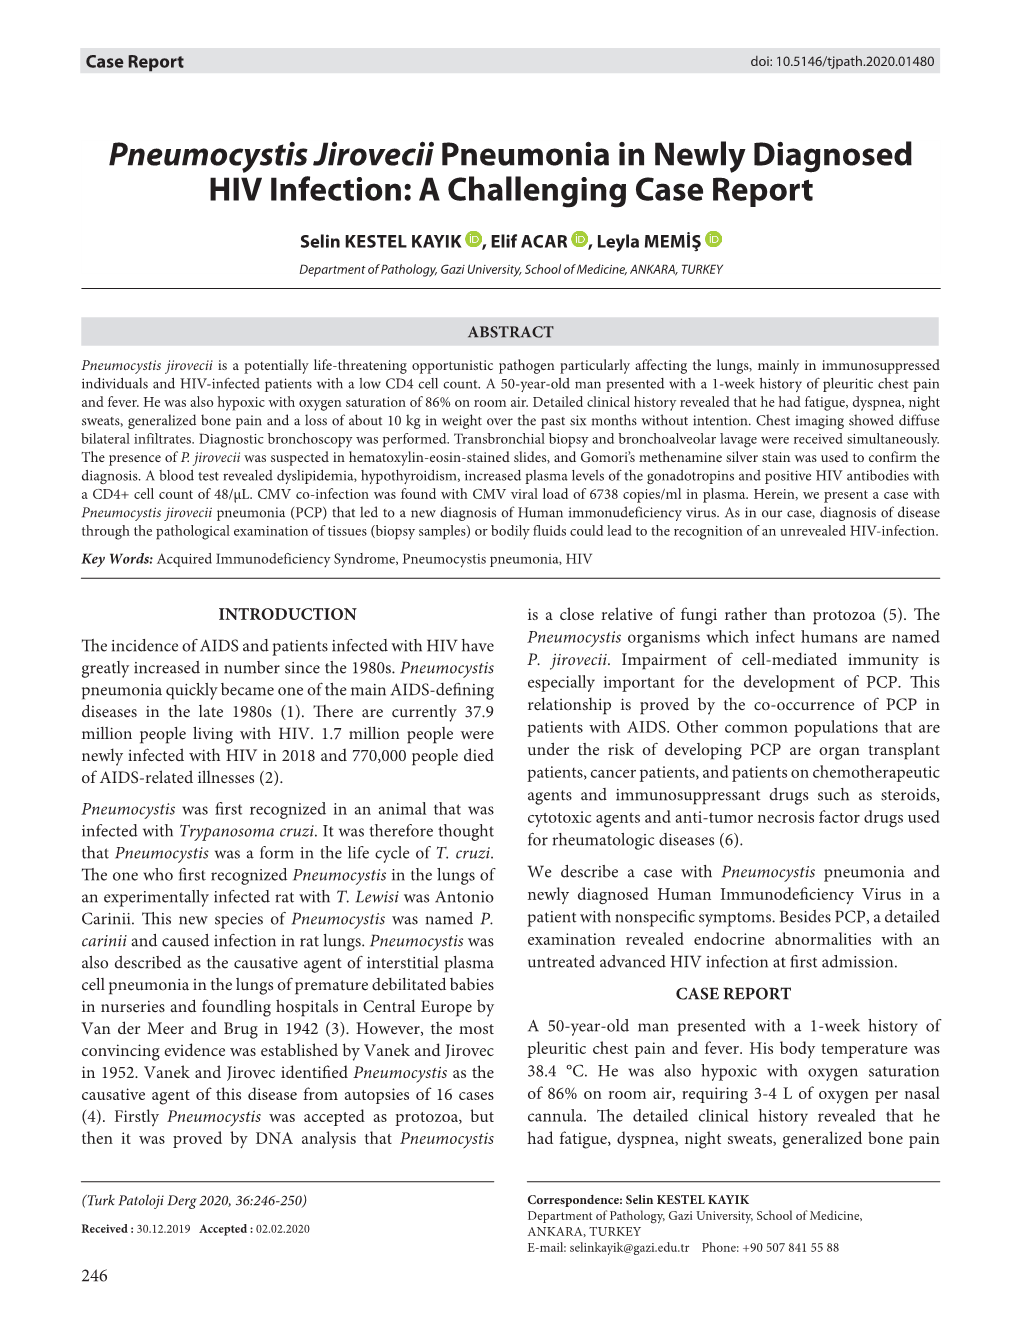 Pneumocystis Jirovecii Pneumonia in Newly Diagnosed HIV Infection: a Challenging Case Report